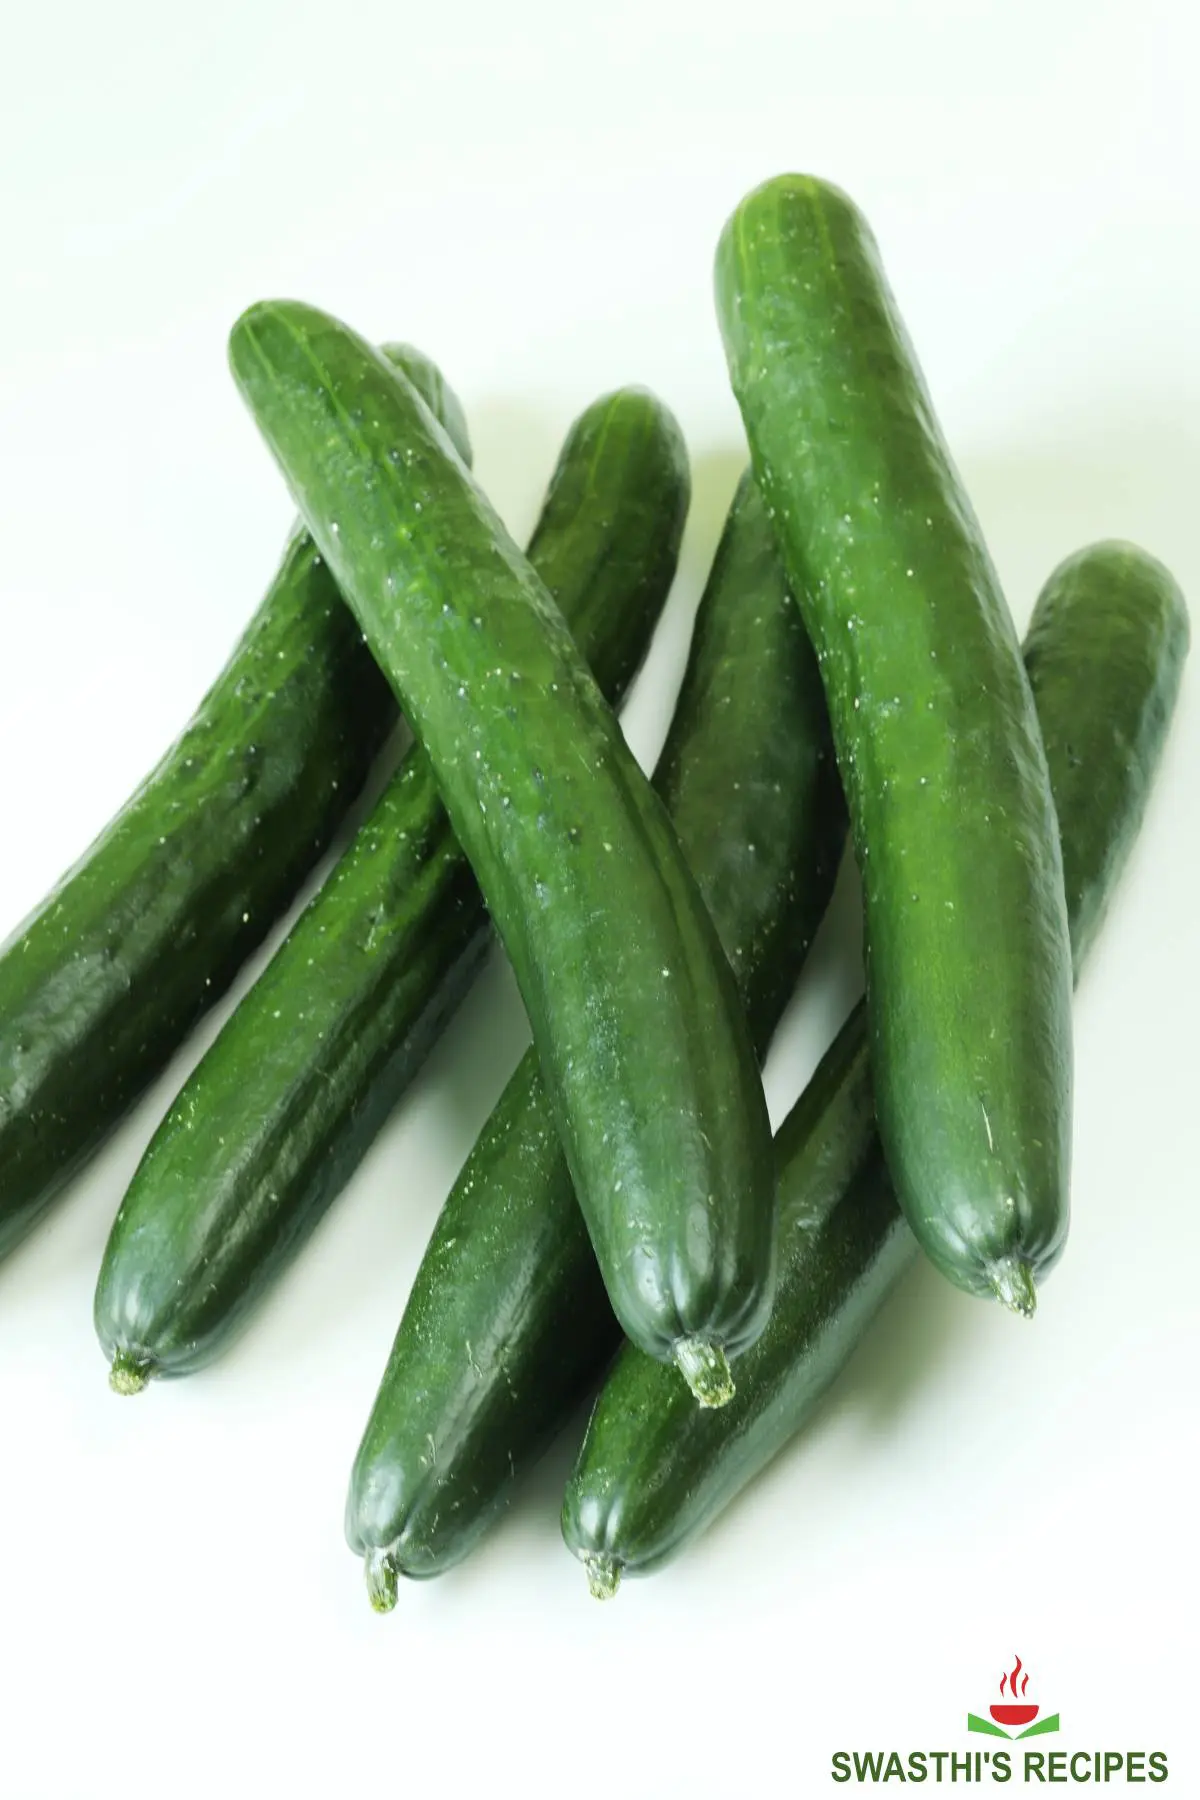 Japanese cucumbers for juicing - Swasthi's Recipes